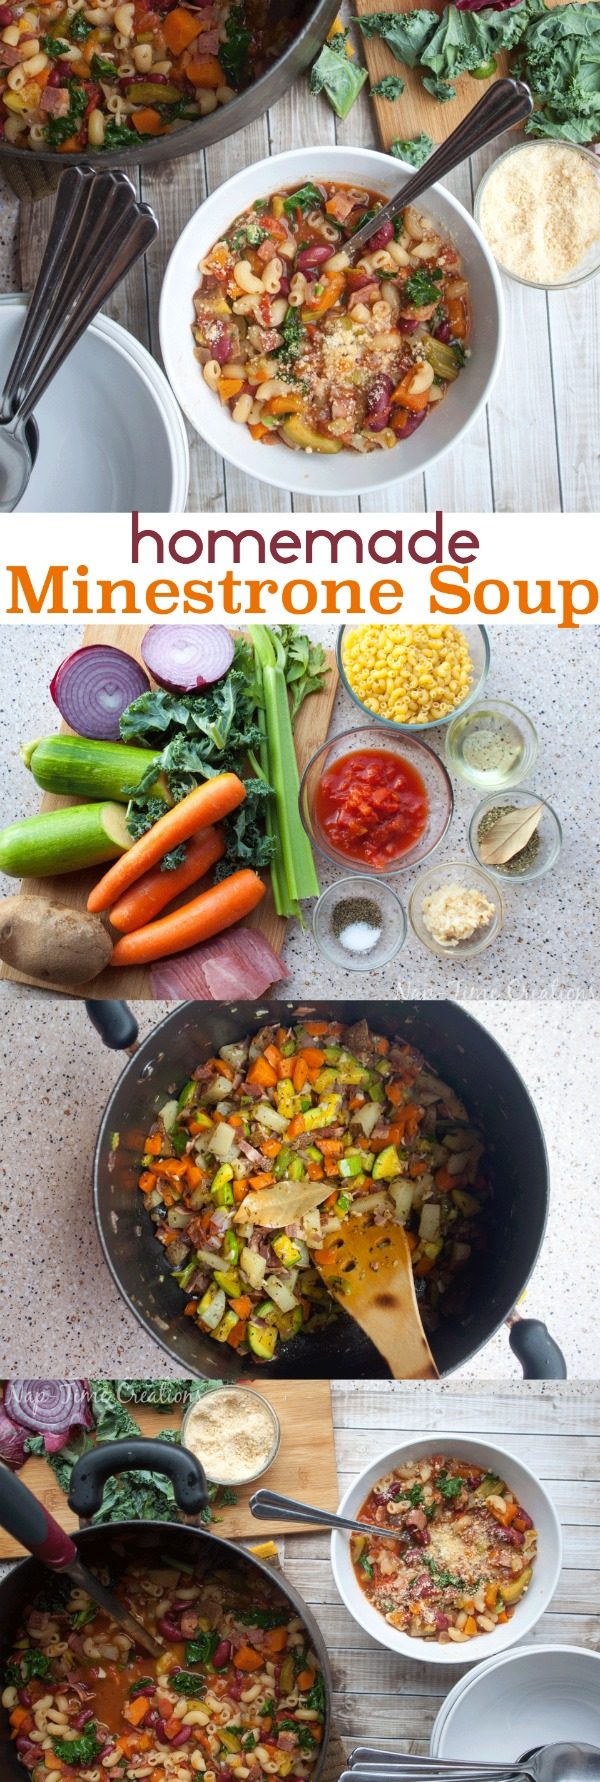 Minestrone Soup Recipe | This homemade Garden Minestrone Soup will have your family running to the dinner table! Perfect for fall and winter! It's the hearty soup you're looking for. See the recipe shared from Nap-Time Creations on Today's Creative Life